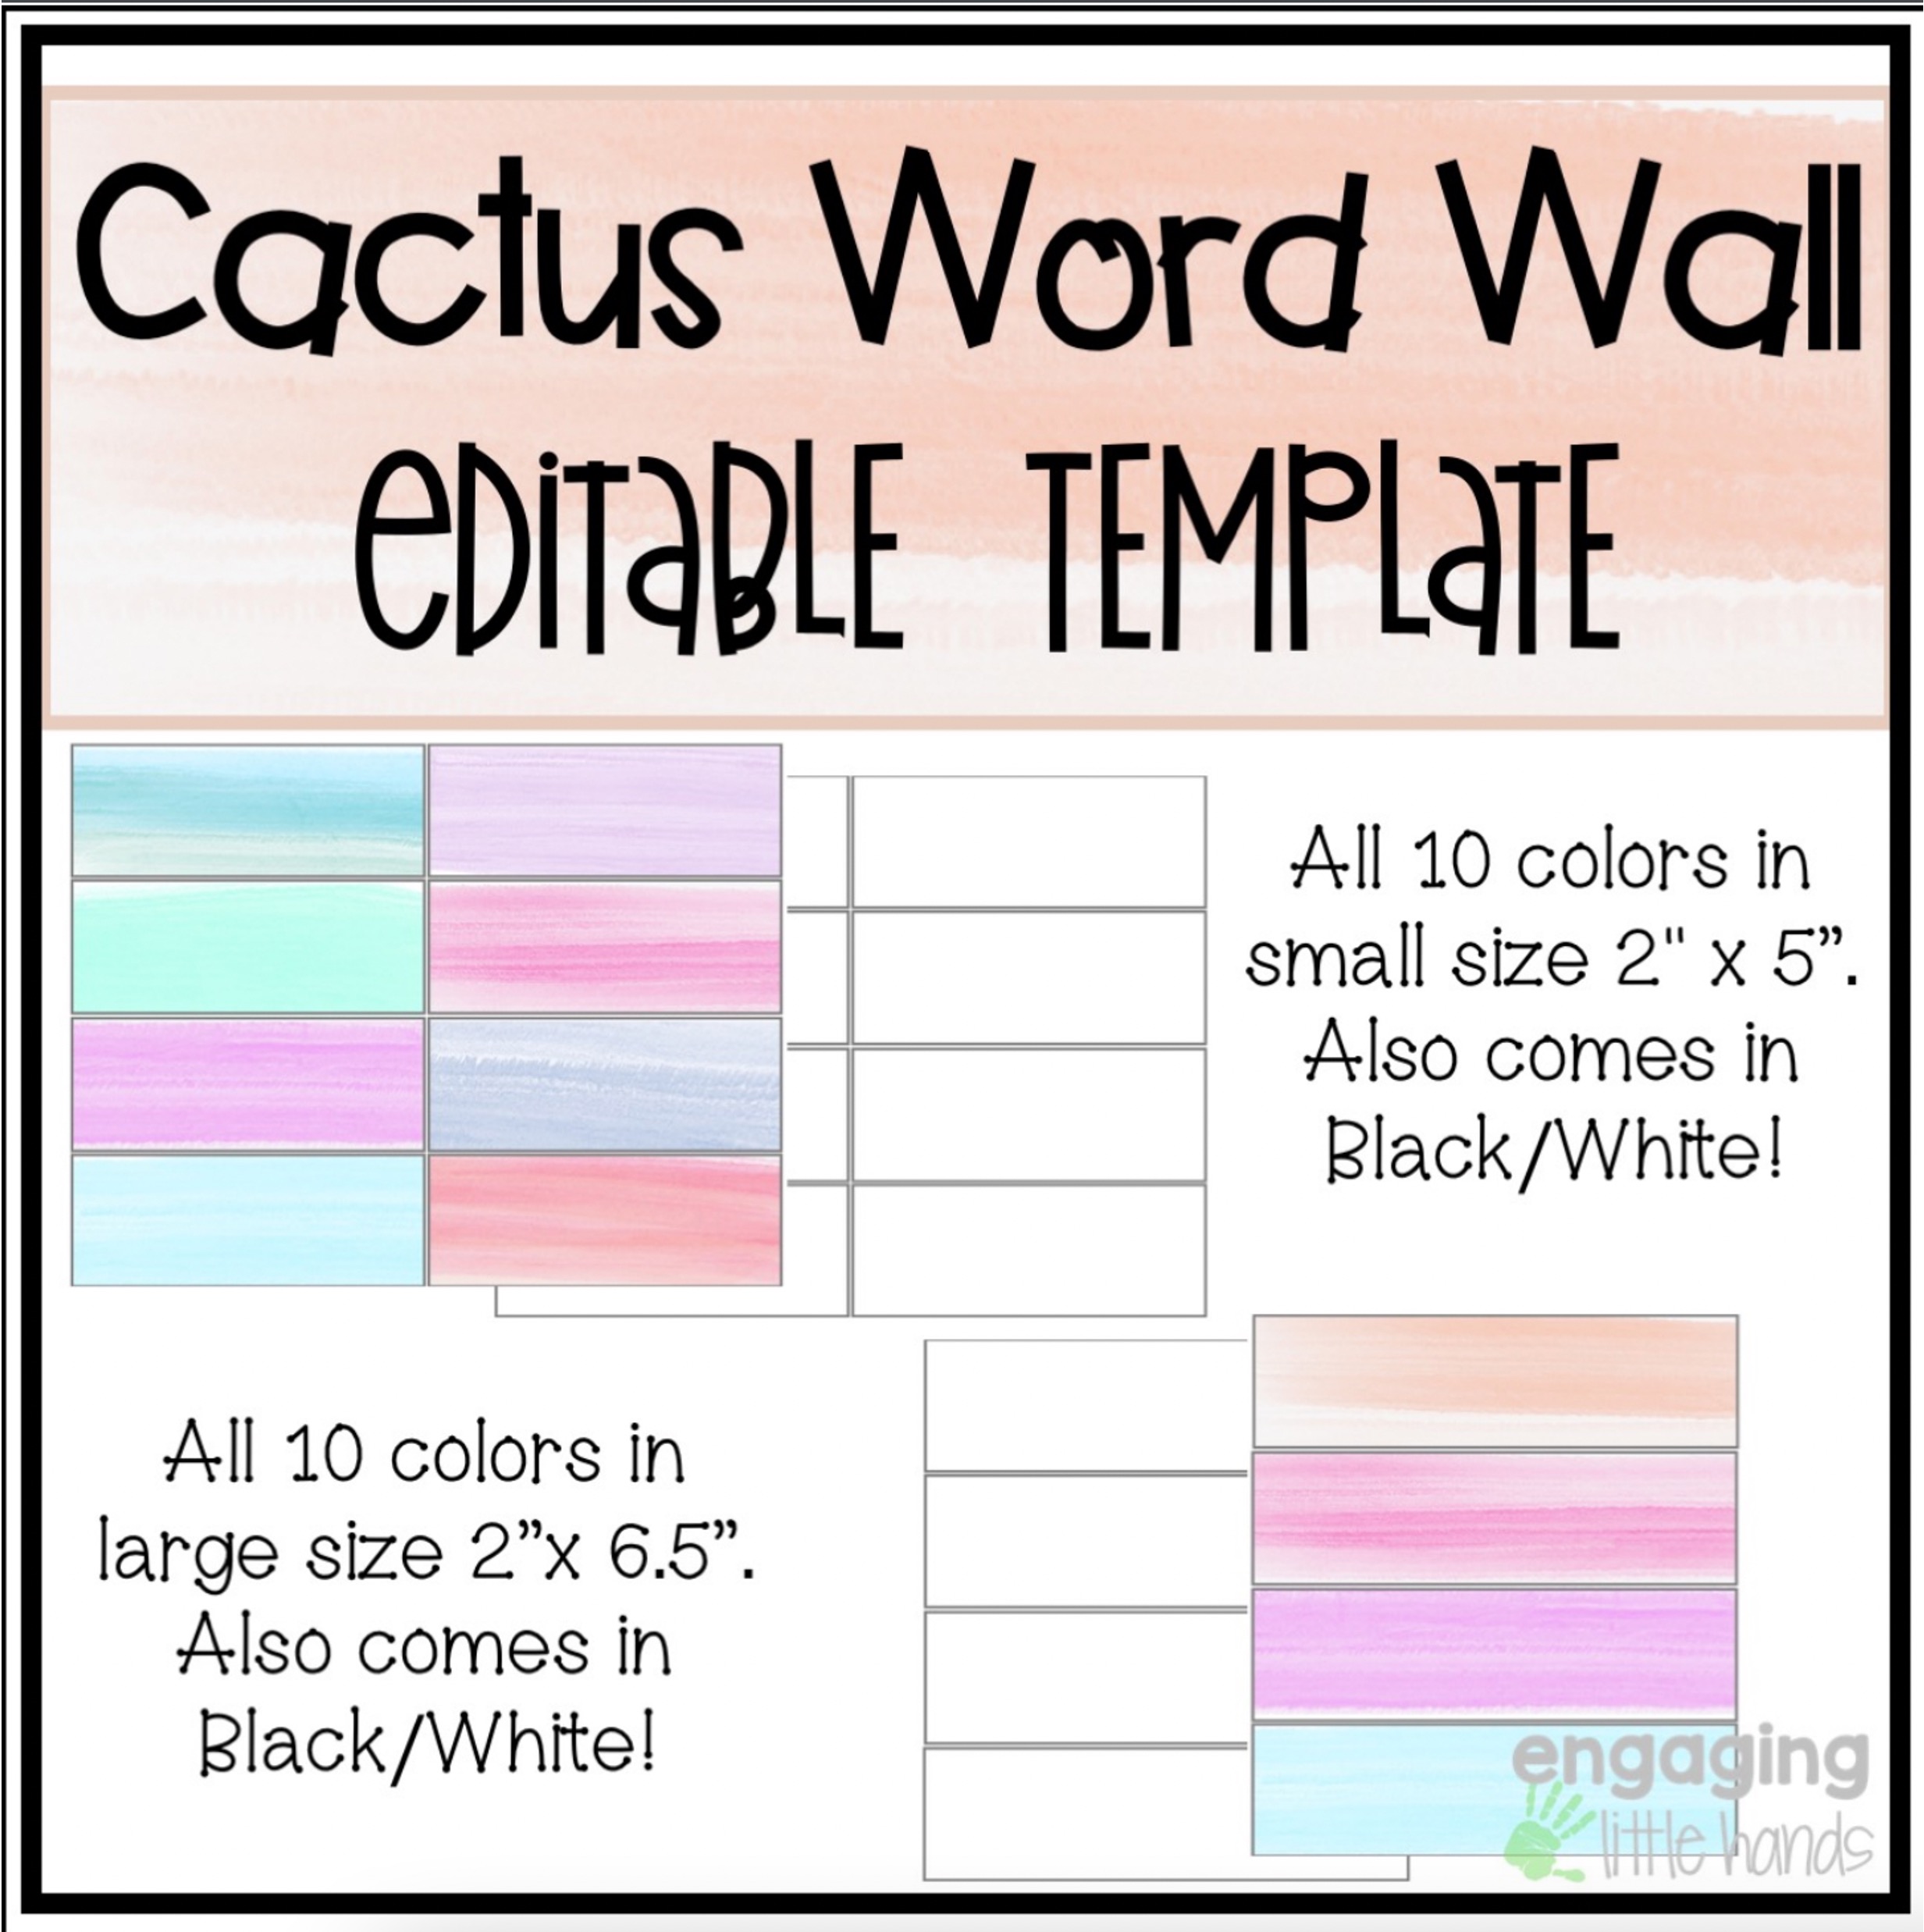 Wordwall template image quiz 